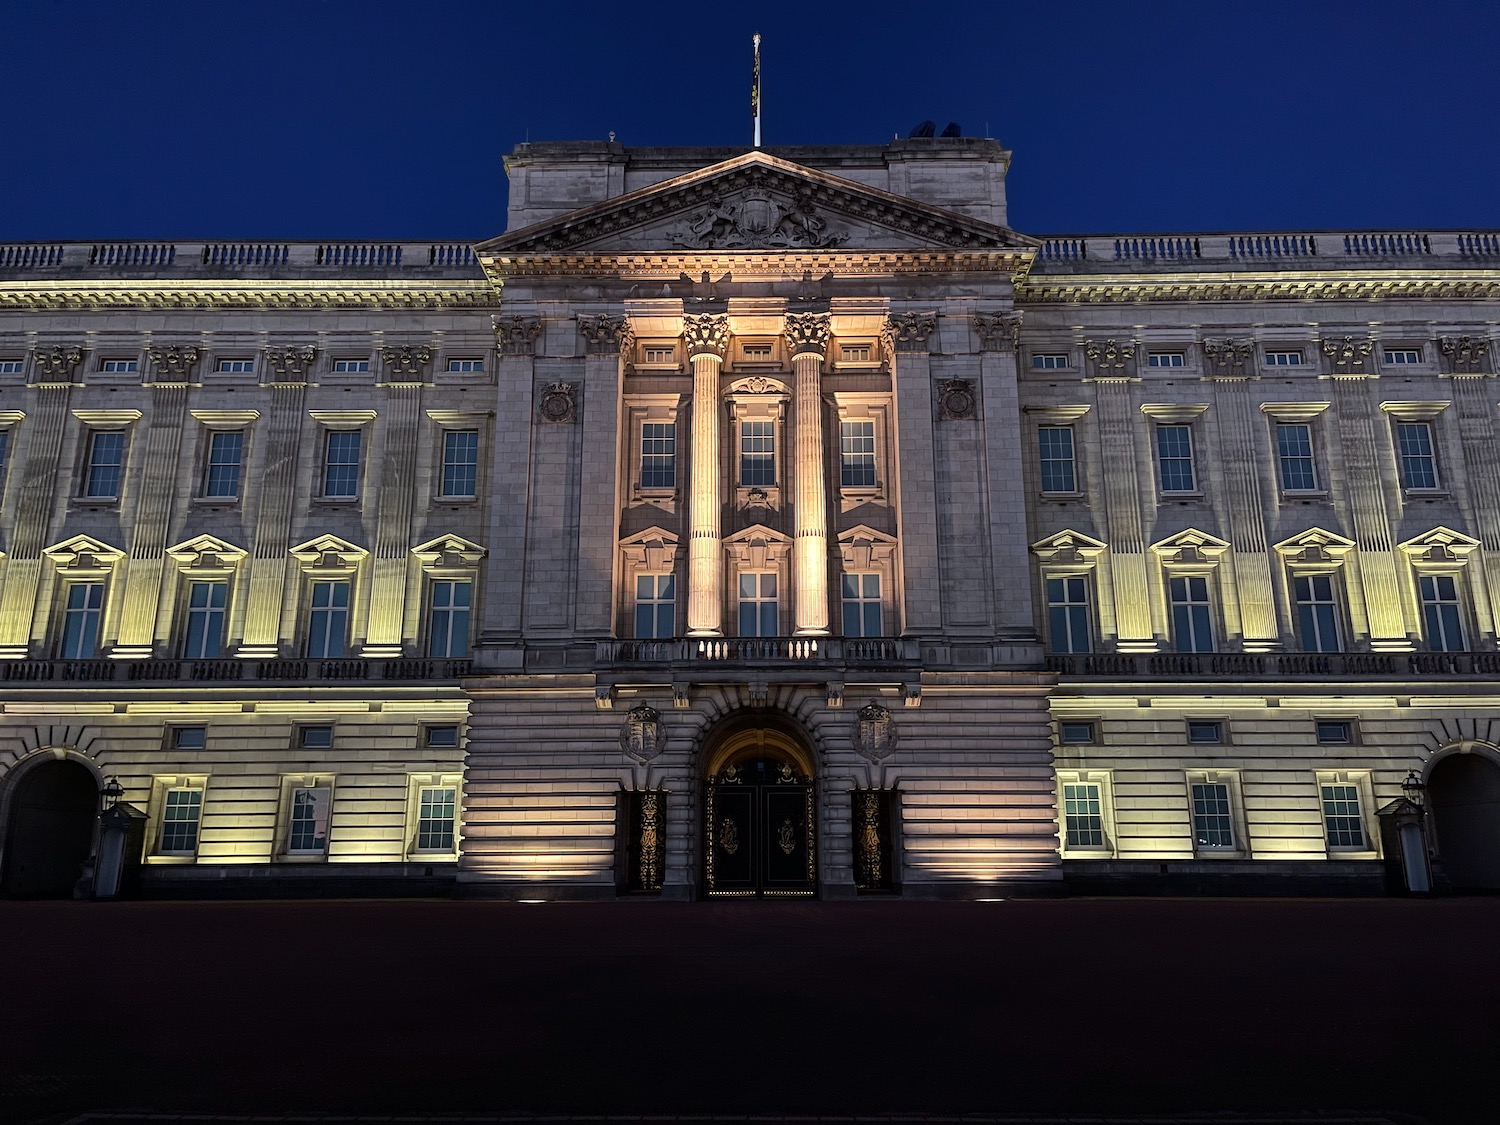 a large building with lights on with Buckingham Palace in the background